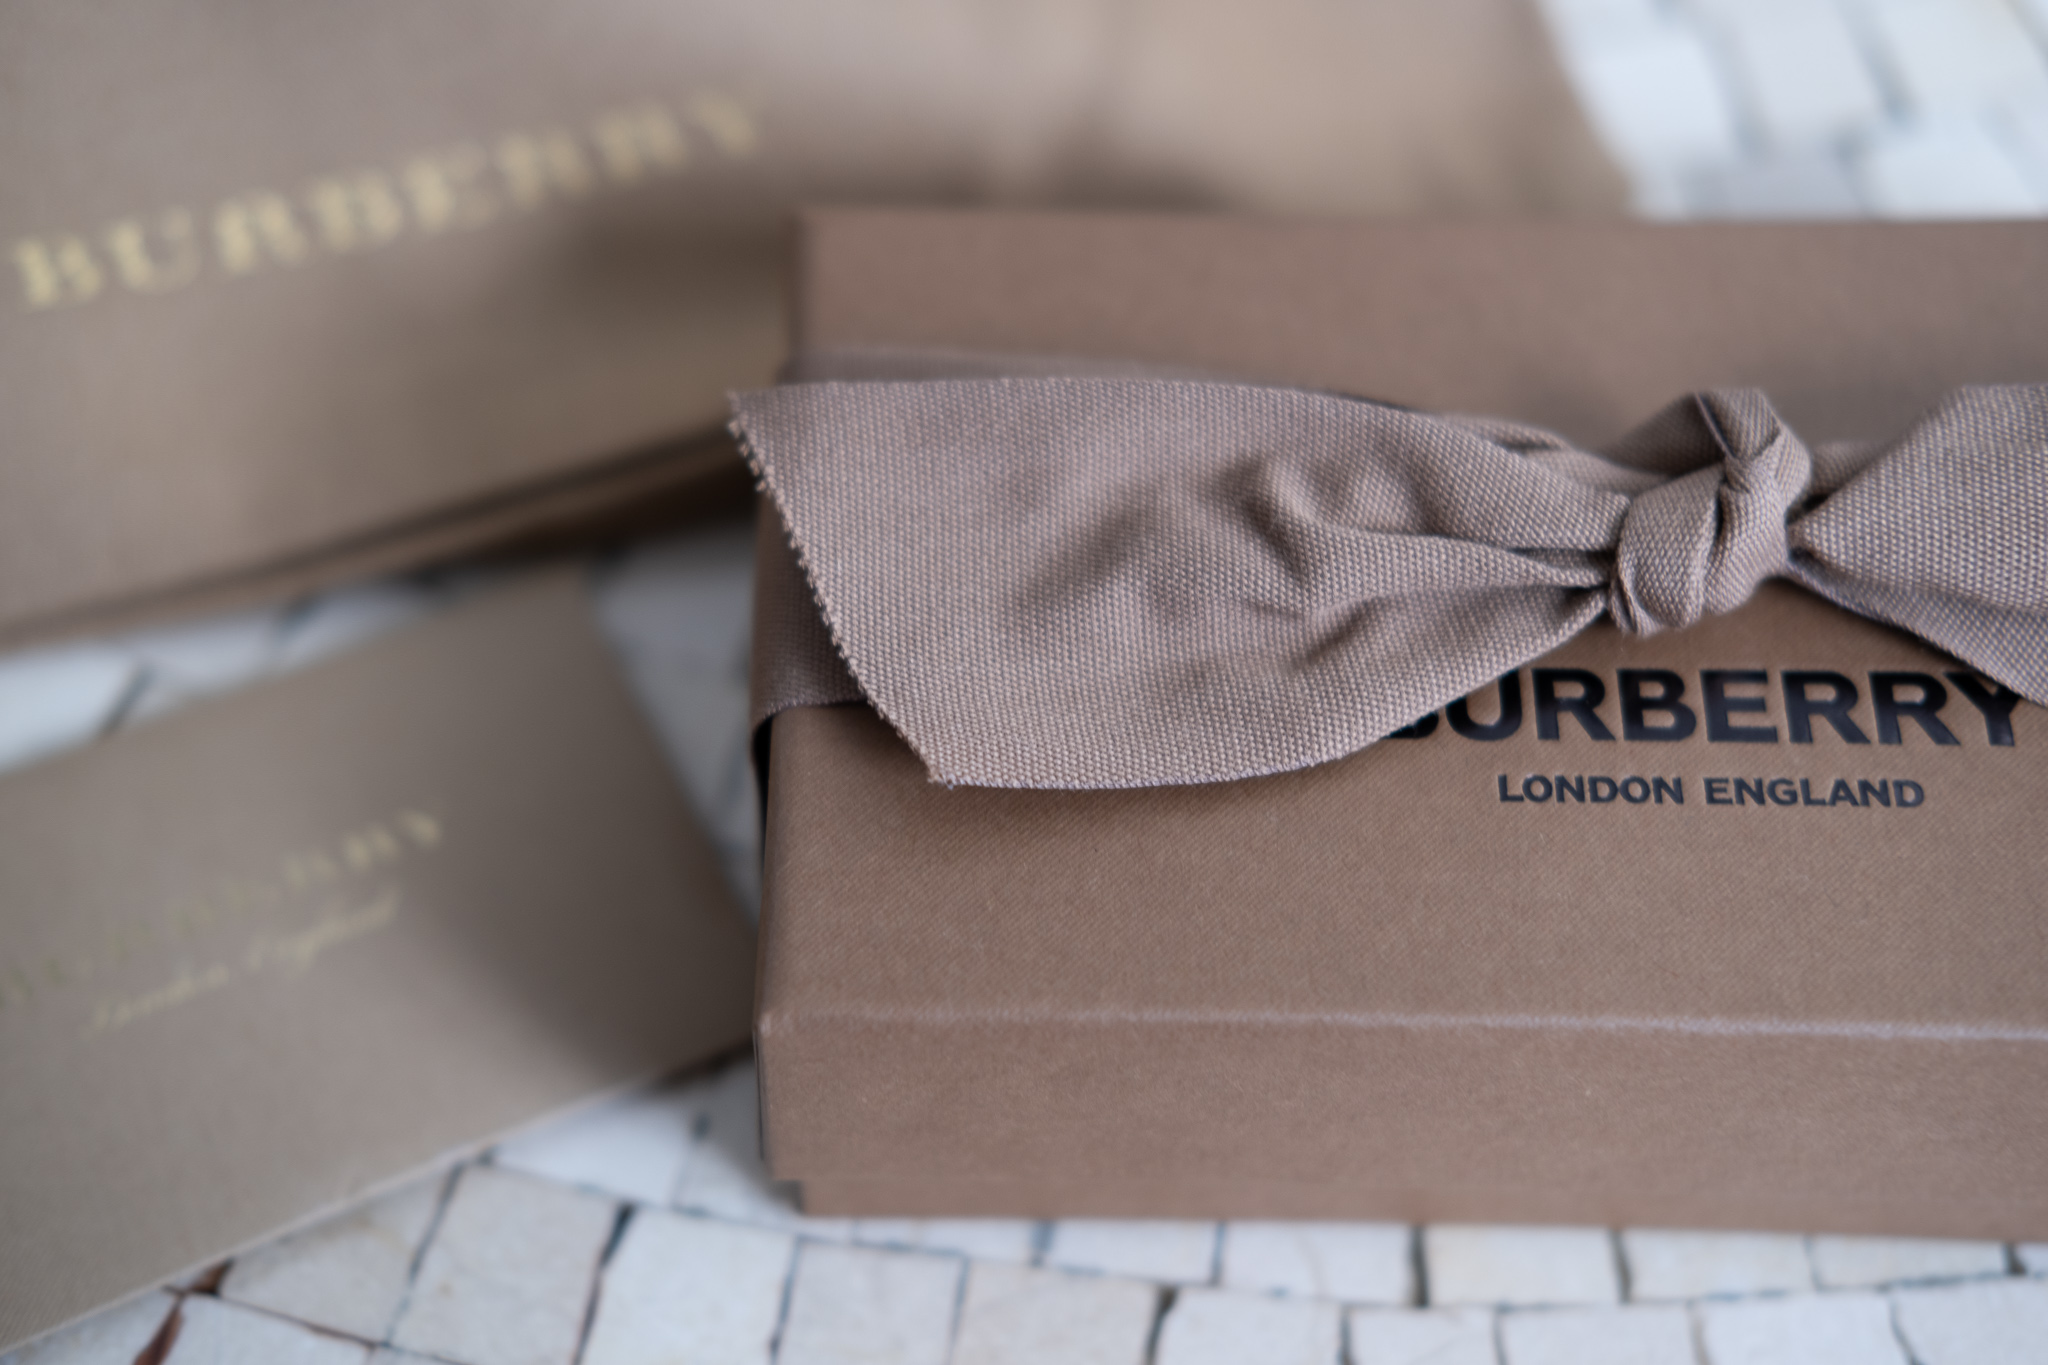 BURBERRY BAG UNBOXING; THE NEWEST ADDITION TO MY HANDBAG COLLECTION